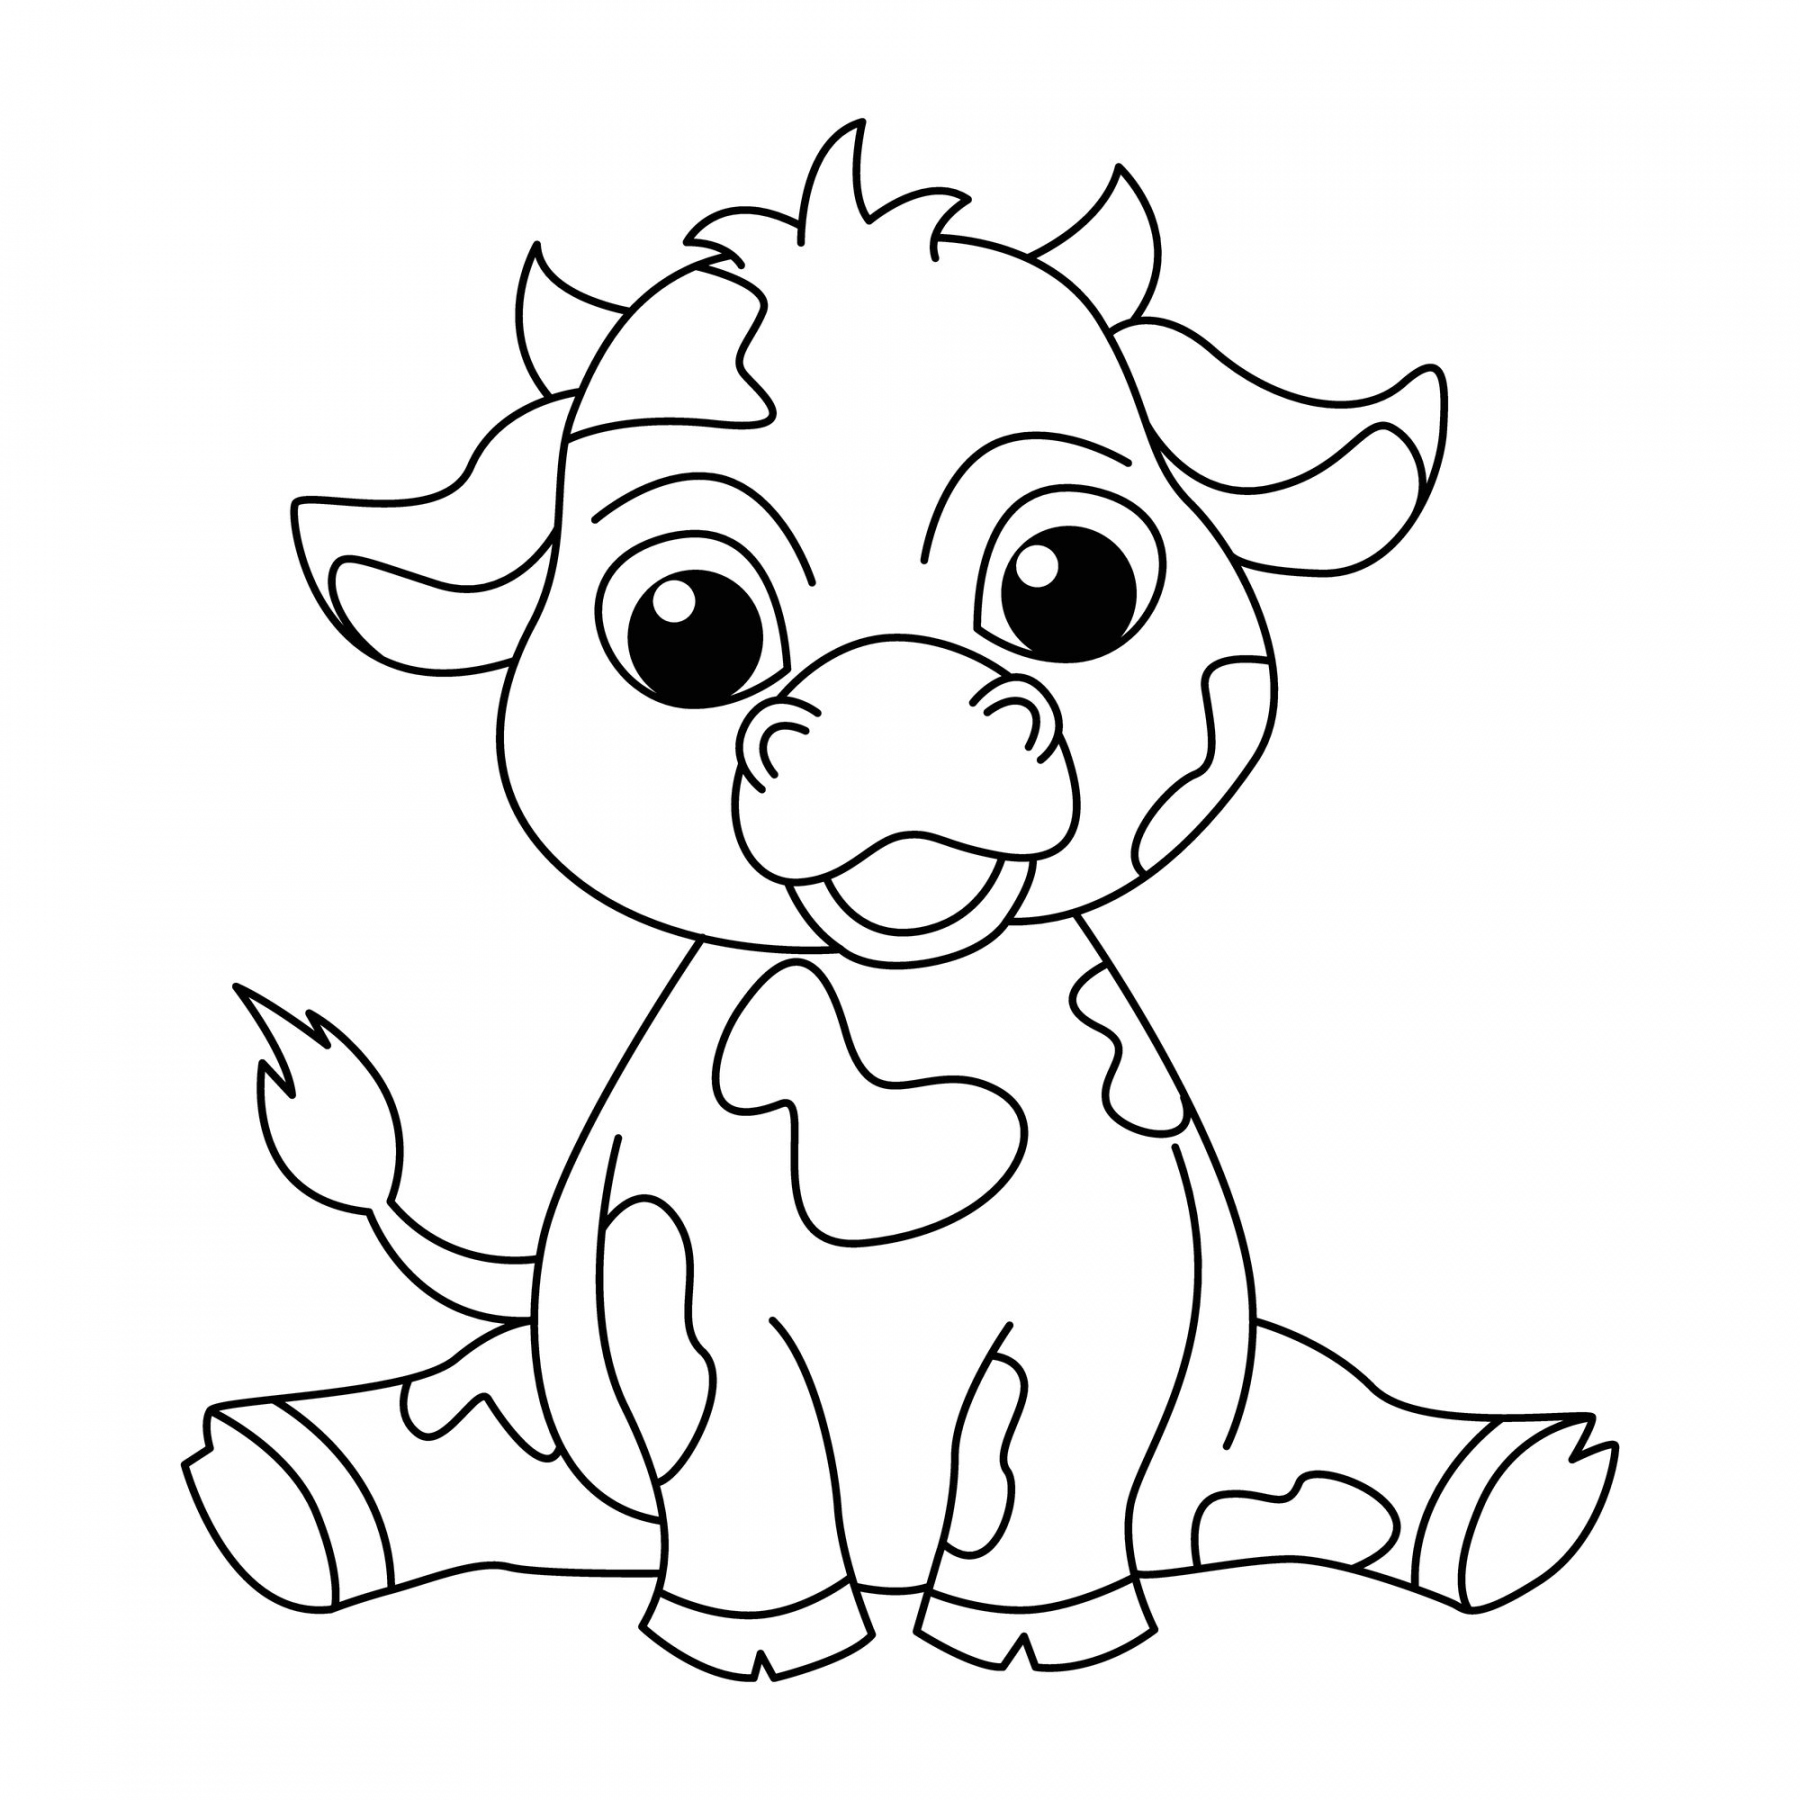 Free Printable Coloring Pages - Printable - Free Printable Colouring Pages for Kids - McQueens Dairies